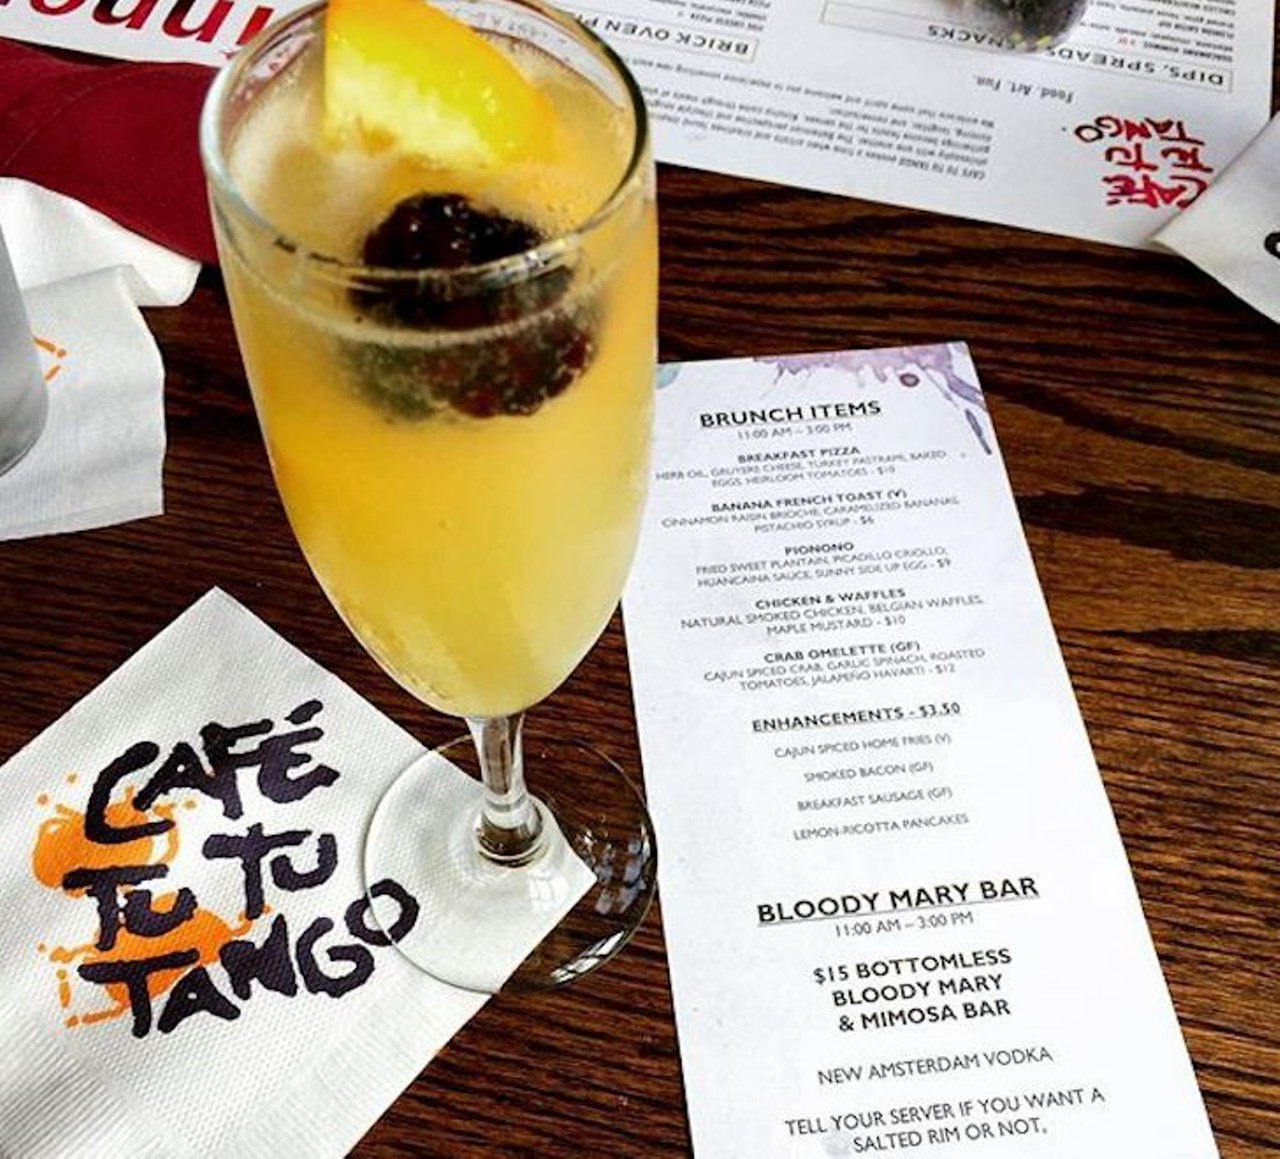 Cafe Tu Tu Tango
8625 International Drive | (407) 248-2222
Mimosa&#146;s aren&#146;t the only thing that&#146;s bottomless here. The all-you-can-drink mimosa and bloody mary bar is $15 but for $25 you can also go for a bottomless brunch that includes a taco bar, a waffle station and every dish from the scratch kitchen. The special runs every Saturday from 10 a.m. to 3 p.m. and every Sunday from 11 a.m. to 3 p.m.
Photo via Cafe Tu Tu Tango/Facebook